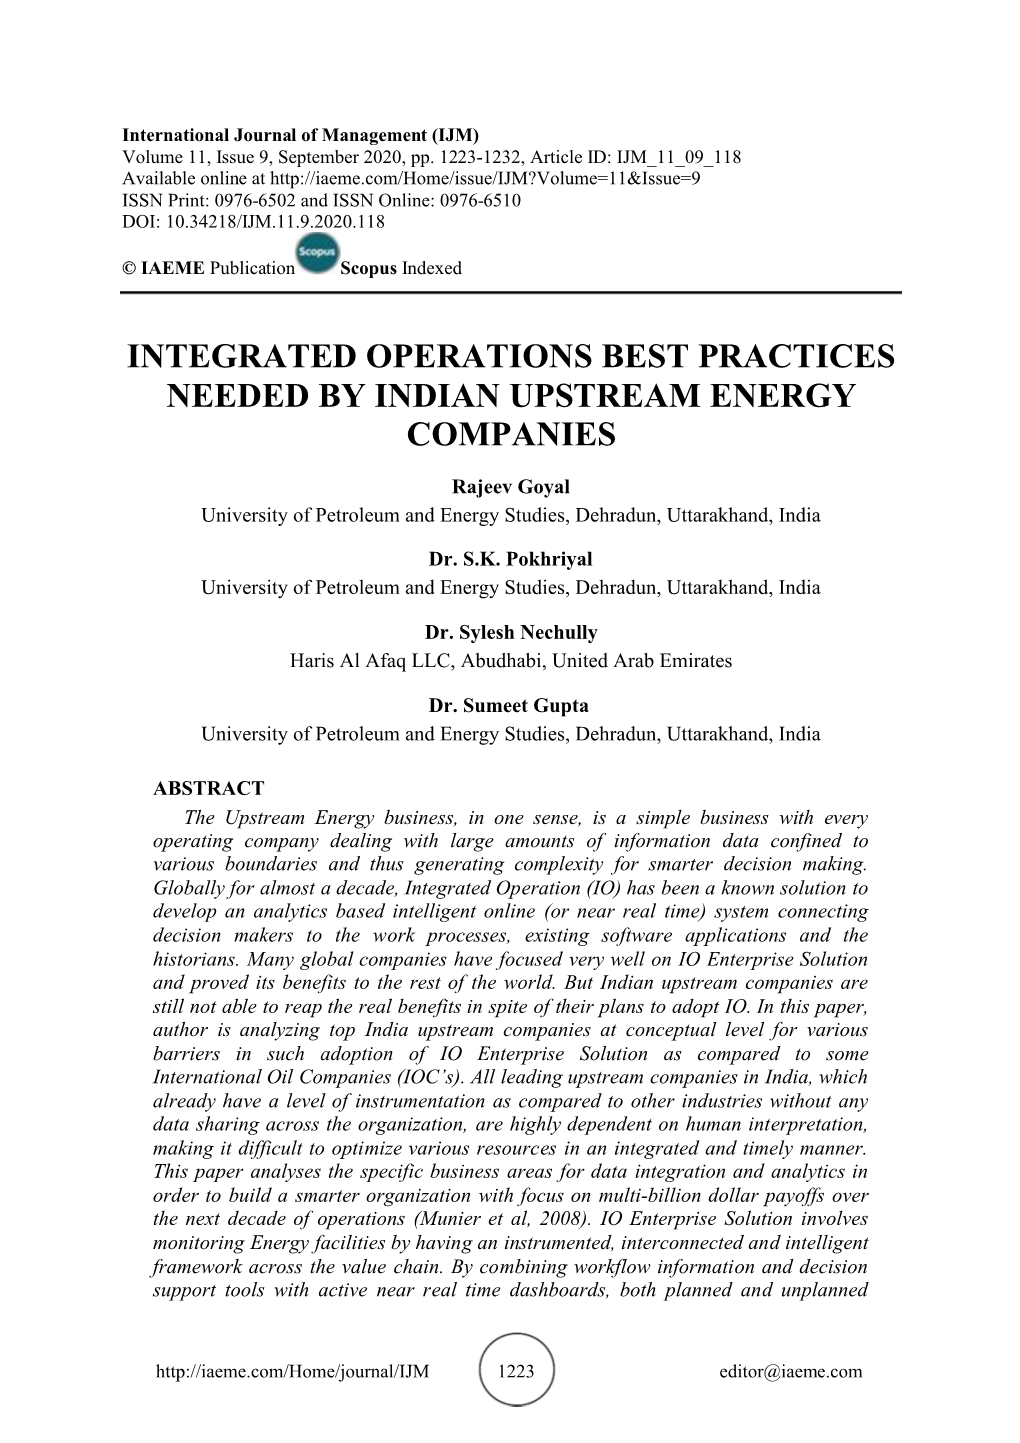 Integrated Operations Best Practices Needed by Indian Upstream Energy Companies